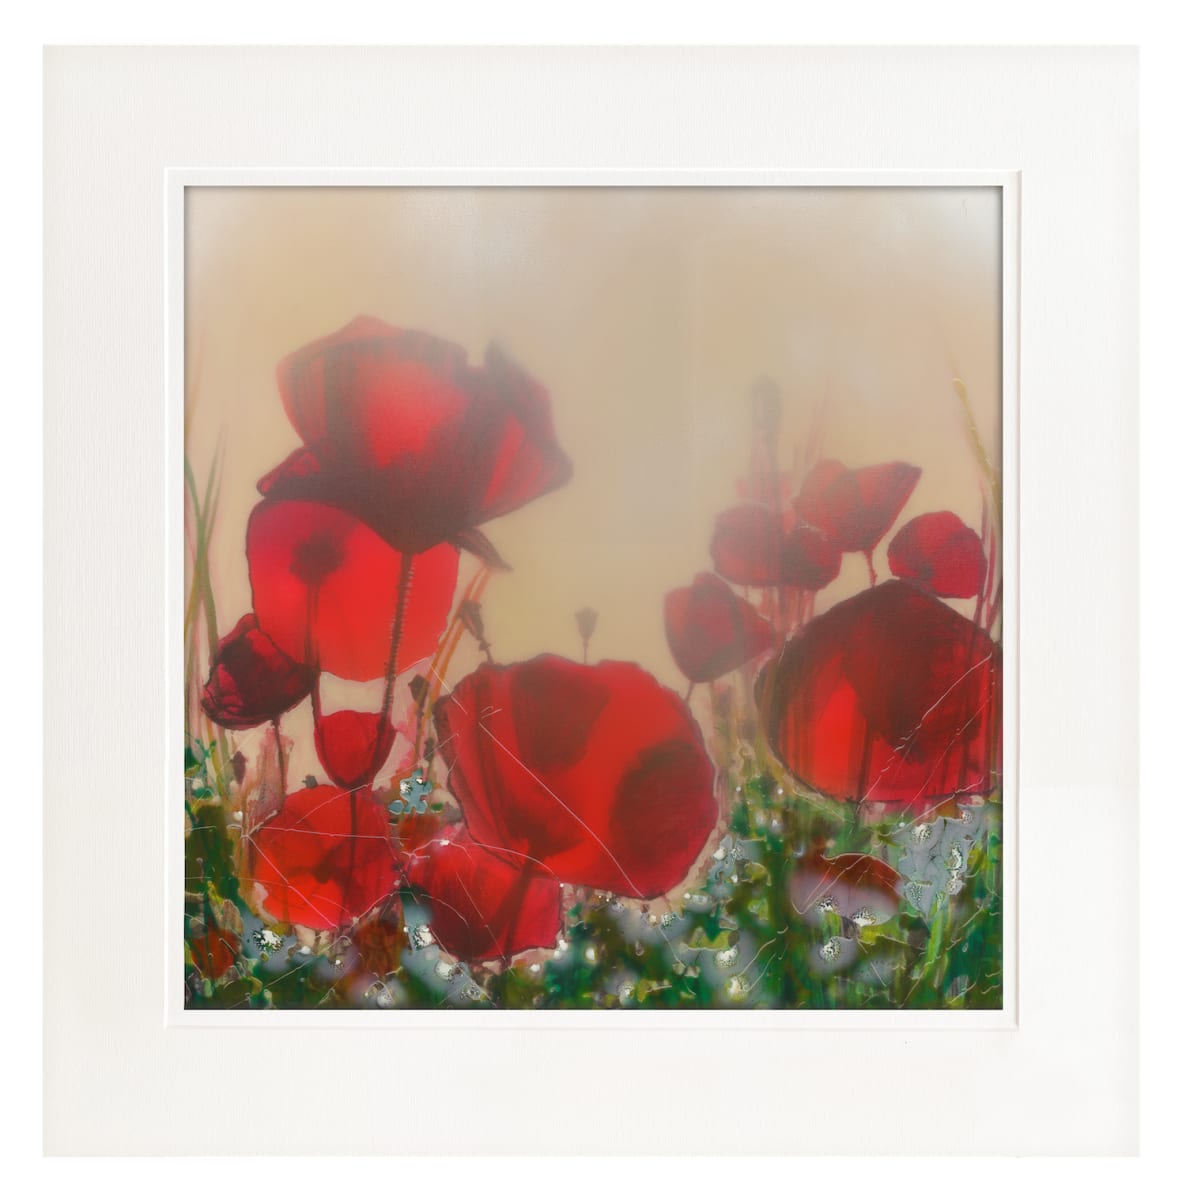 Wall art prints | Limited Edition Print | Poppy Haze - Signed Limited Edition Print with mount (unframed) - 150 in edition 5/150 